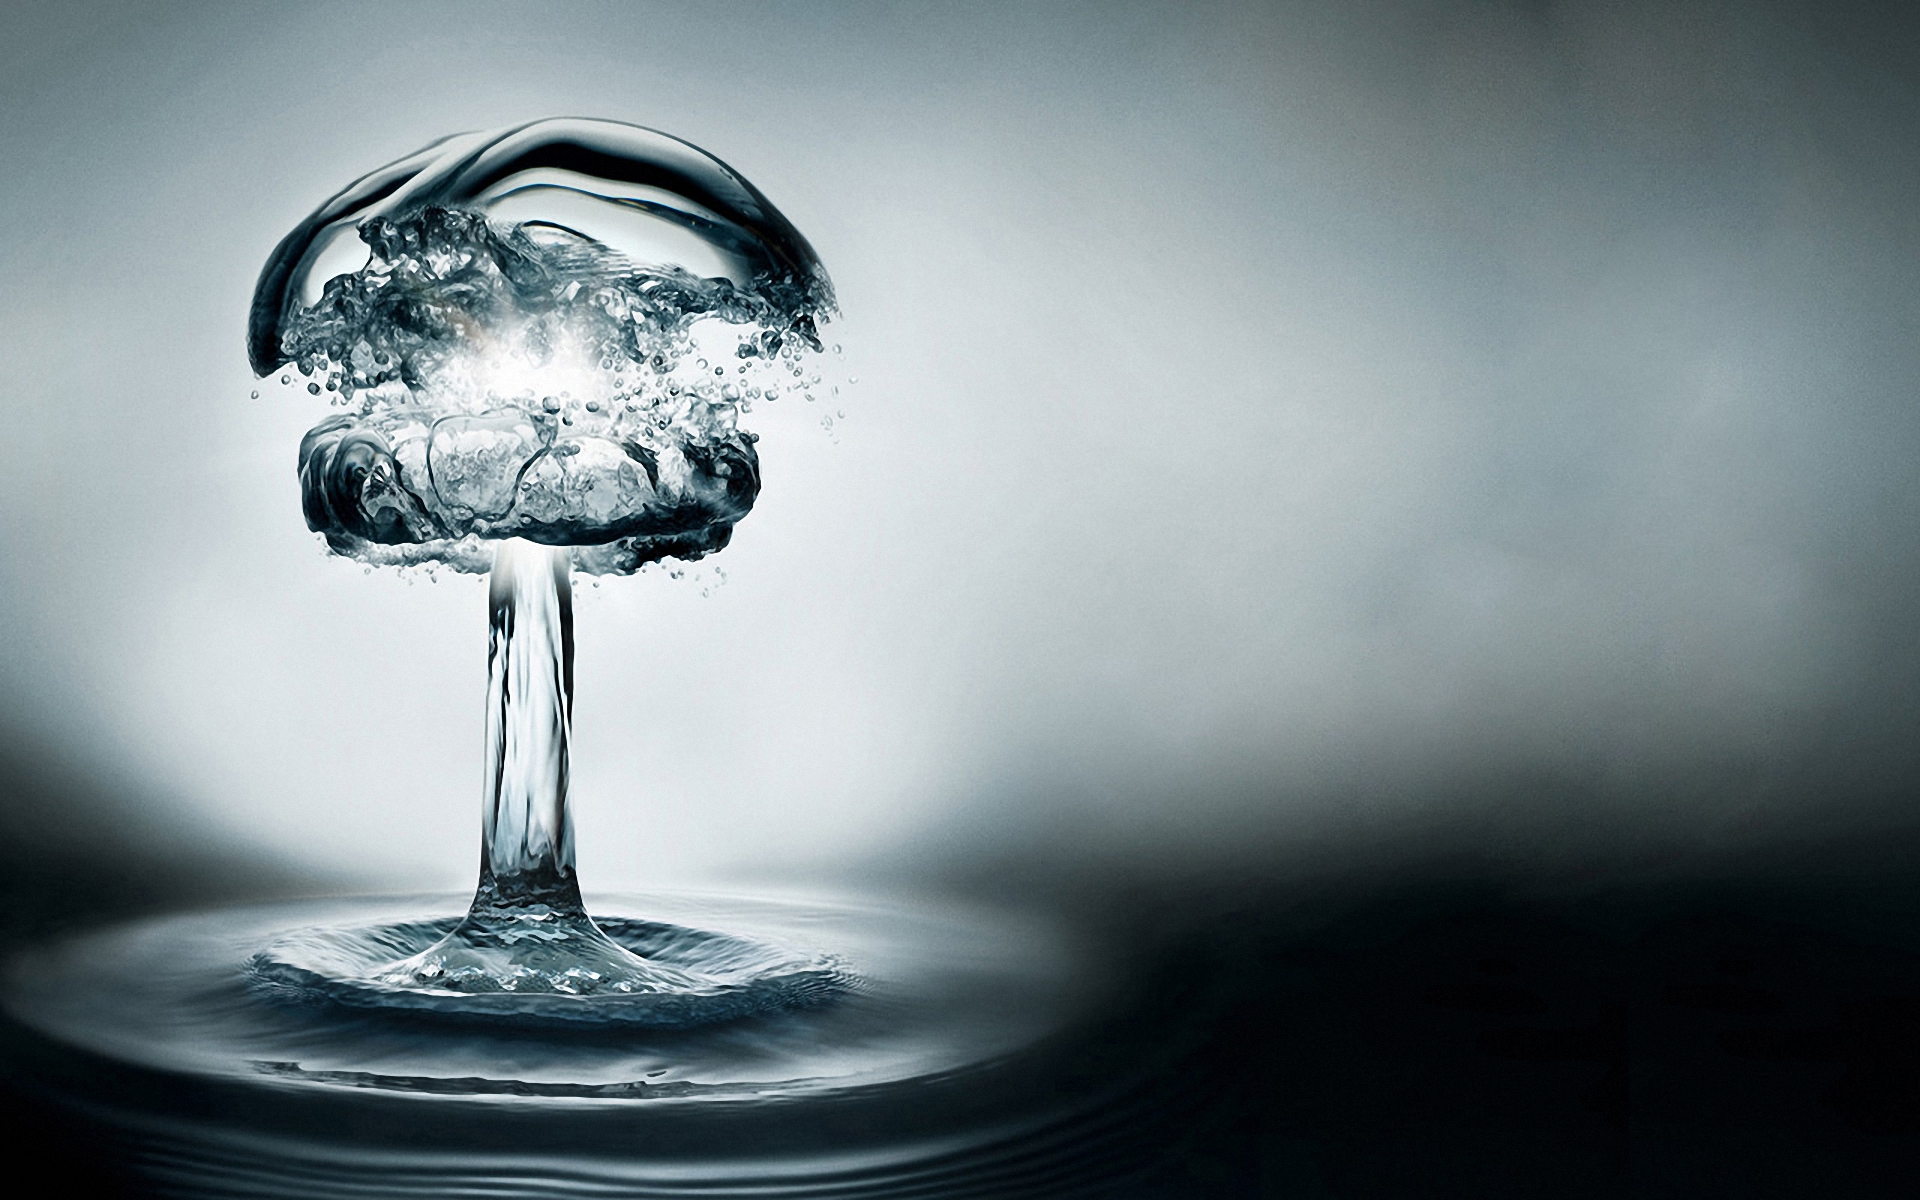 artistic, abstract, atomic, bomb, water 4K